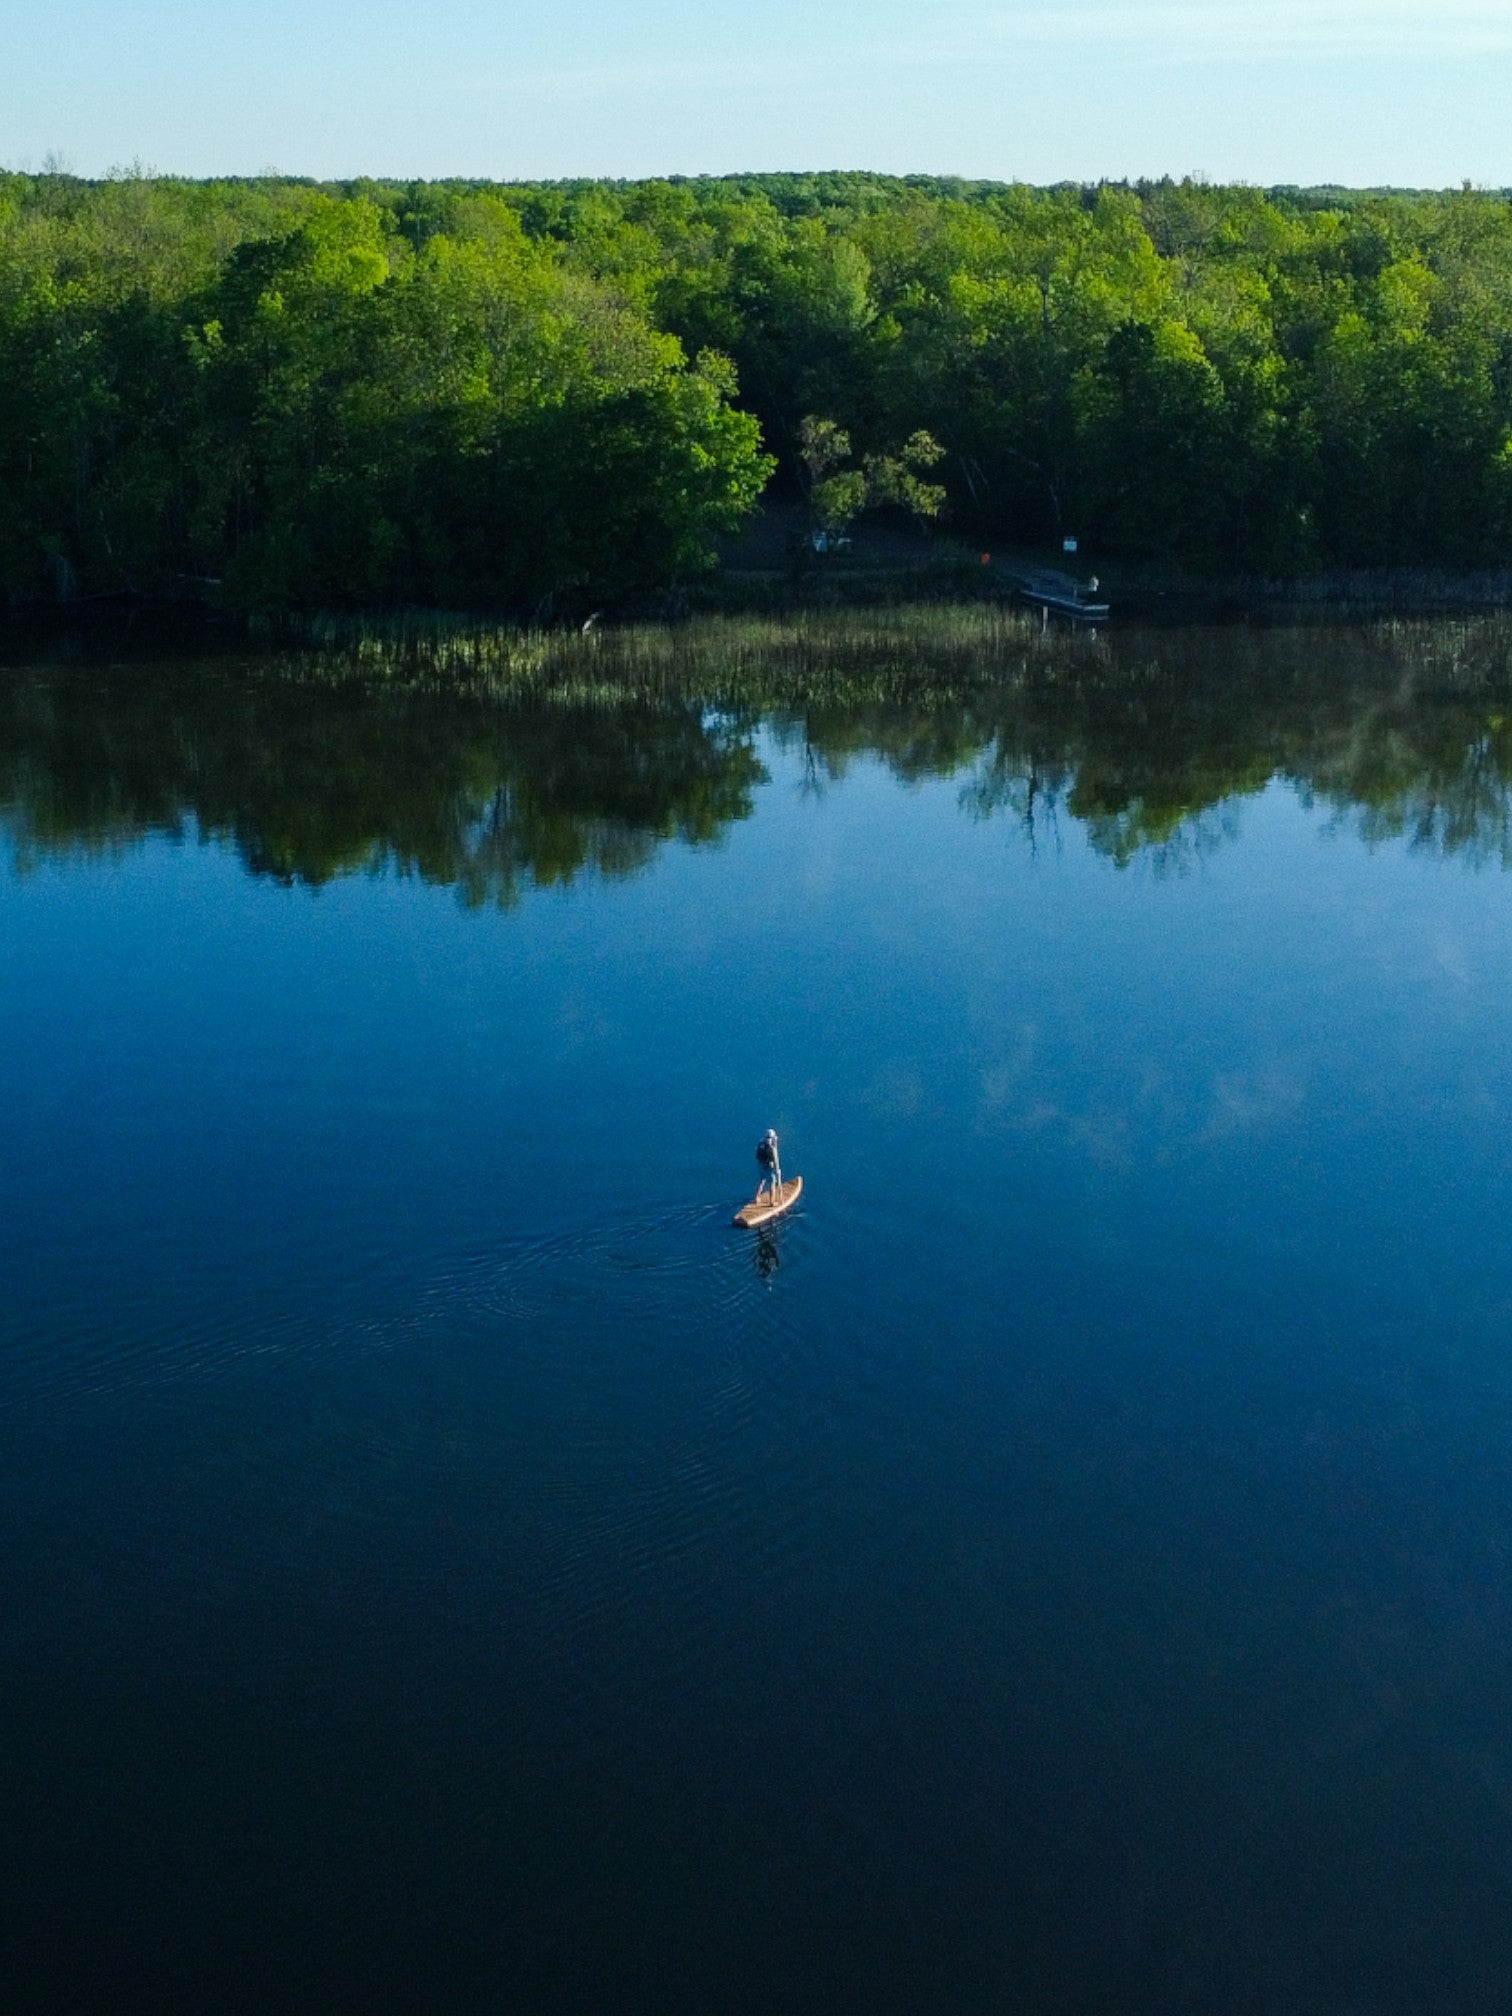 Drone shot of a person paddle boarding on a sunny day surrounded by water.